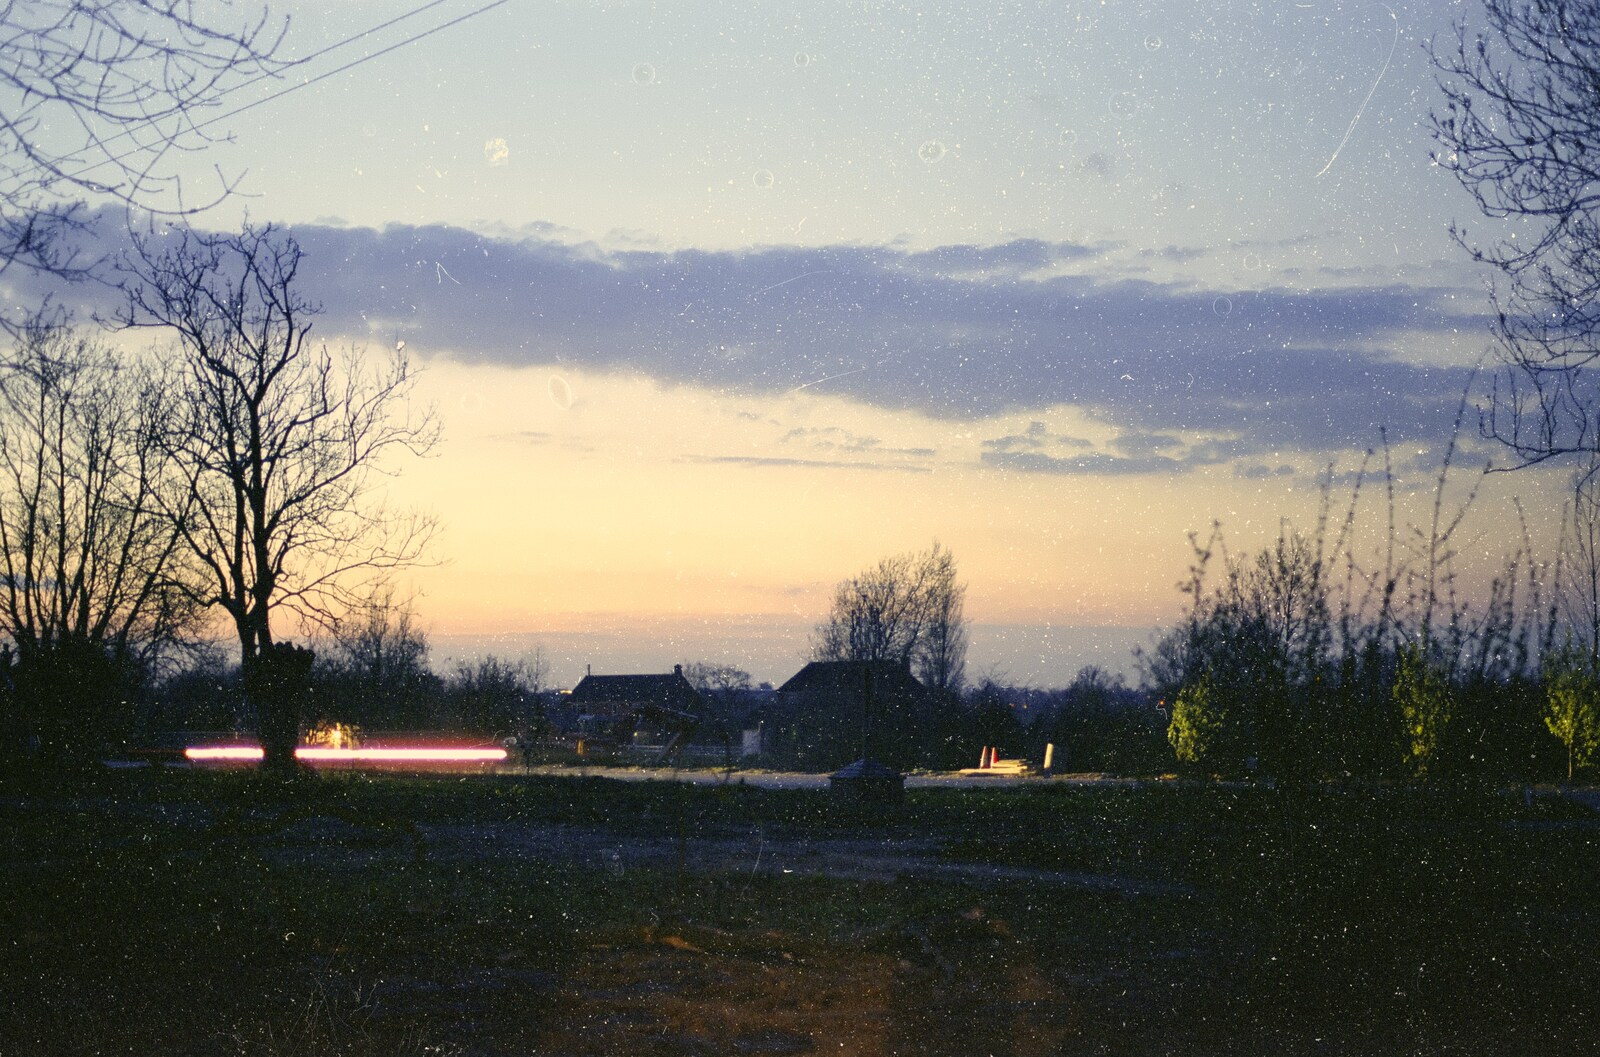 Stuston Common in the dusk from Nosher Leaves BPCC Business Magazines, Colchester, Essex - 18th July 1991